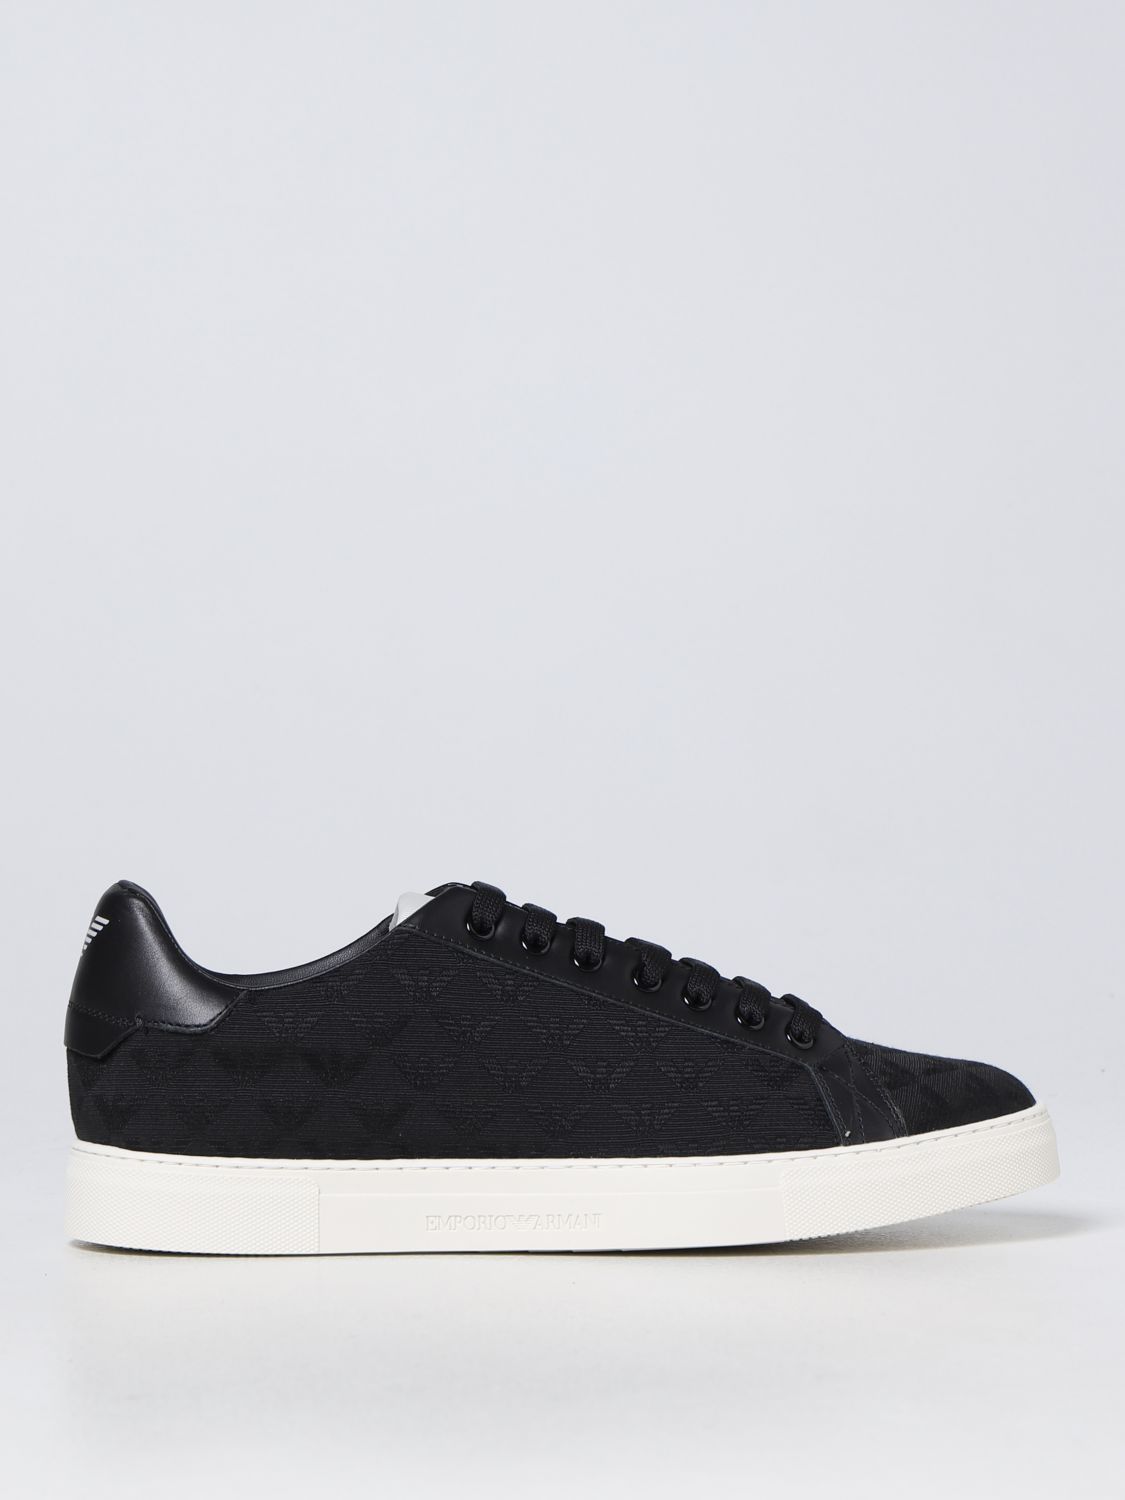 EMPORIO ARMANI SNEAKERS IN SYNTHETIC LEATHER AND COTTON,376971002